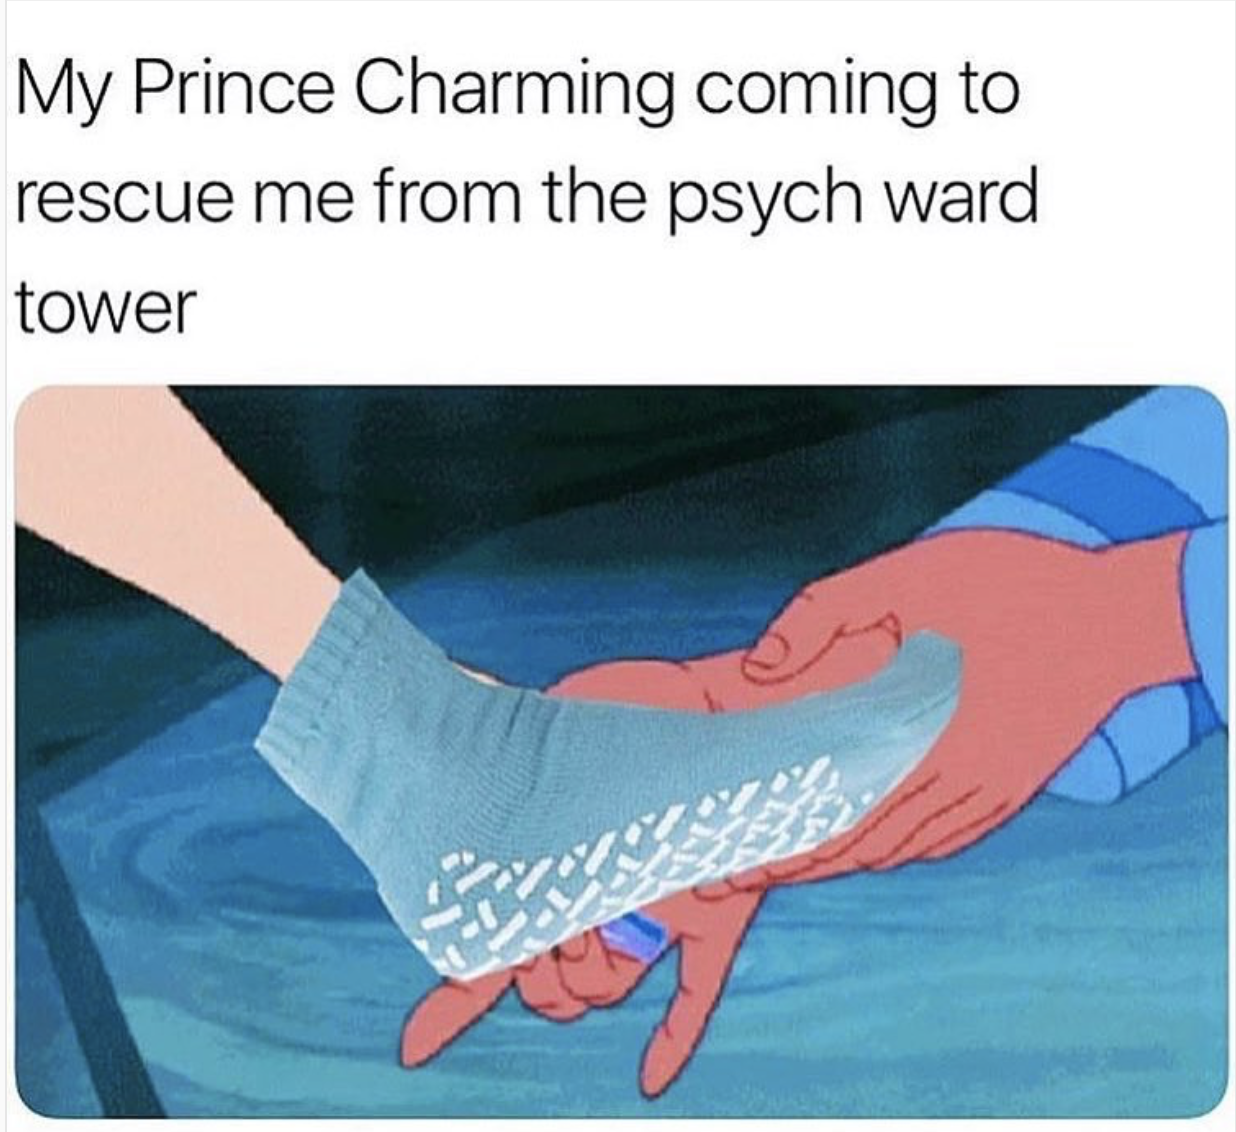 psych ward jokes - My Prince Charming coming to rescue me from the psych ward tower